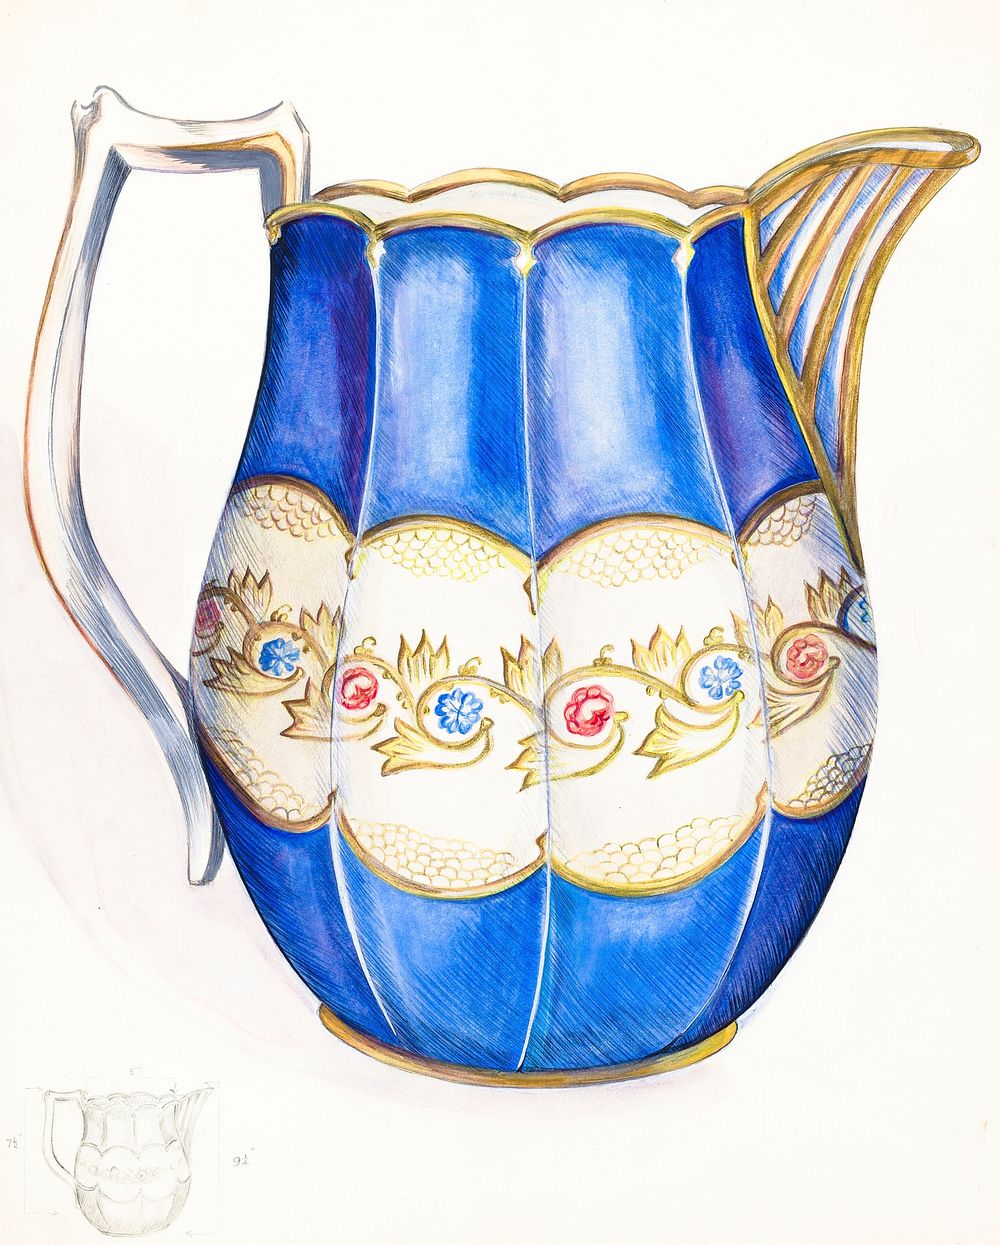 Pitcher (ca. 1937) by Ella Josephine Sterling. Original from The National Gallery of Art. Digitally enhanced by rawpixel.